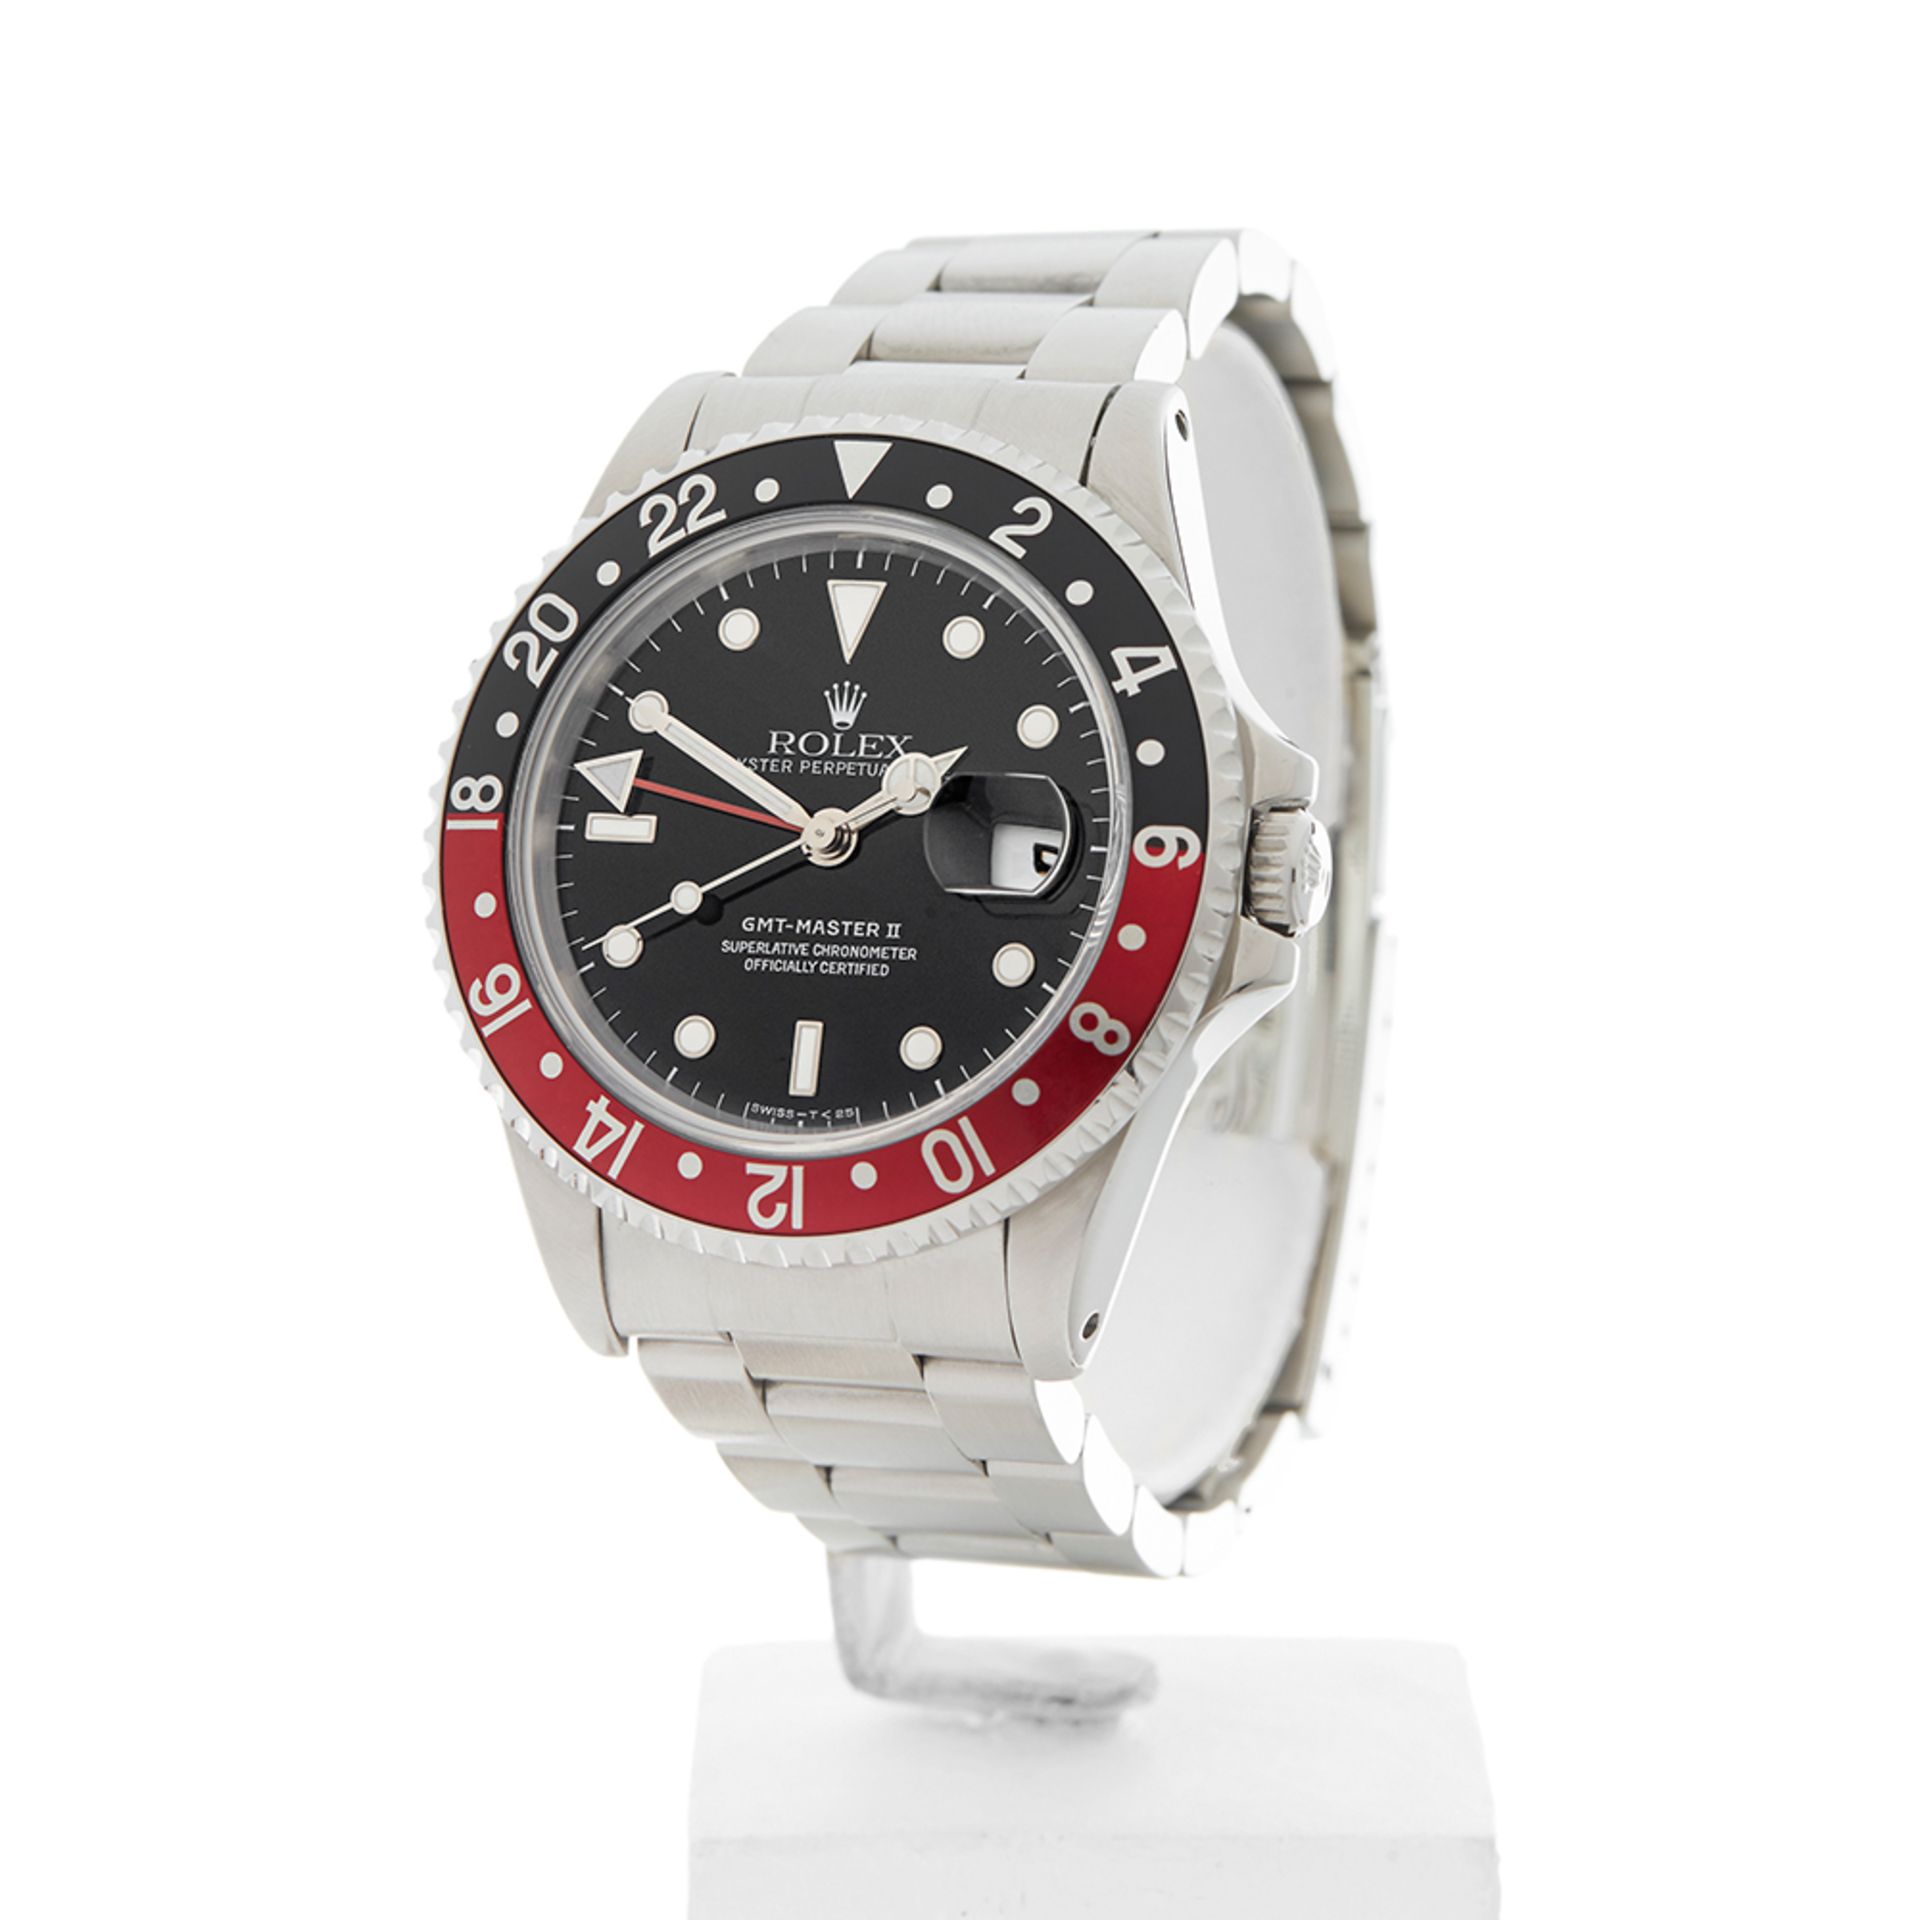 GMT-Master II Coke 40mm Stainless Steel - 16710 - Image 3 of 9